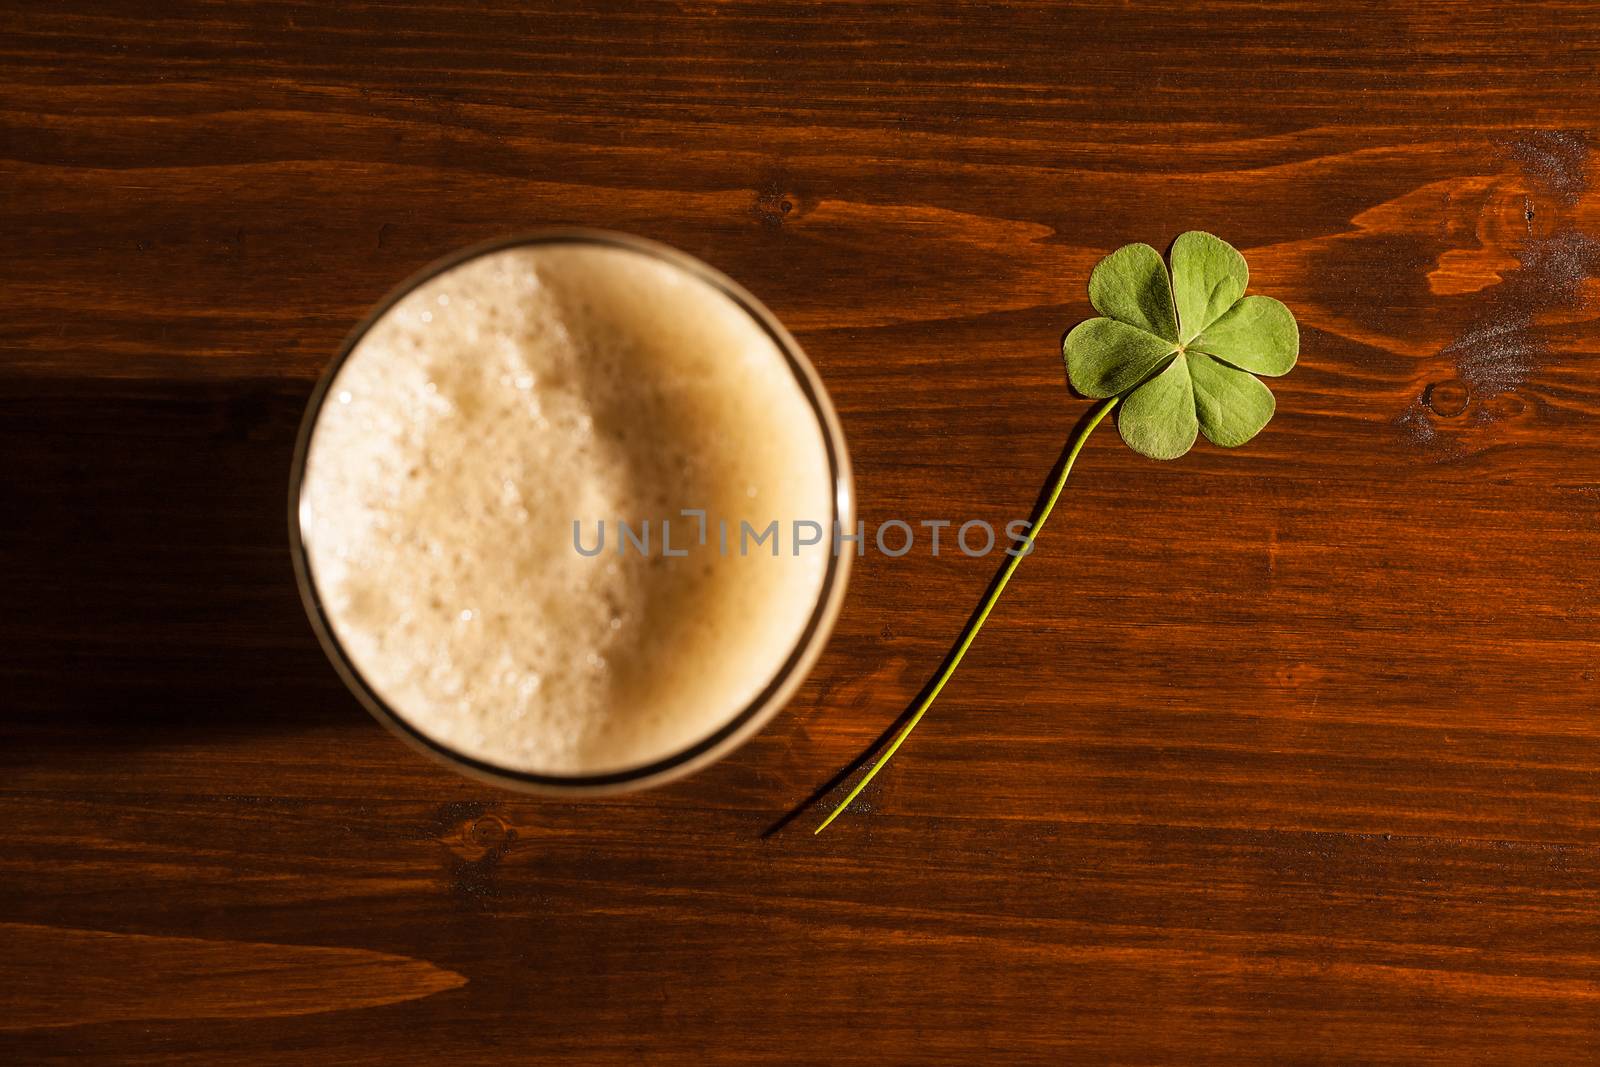 Pint of black beer and a shamrock on a wood background seen from above.